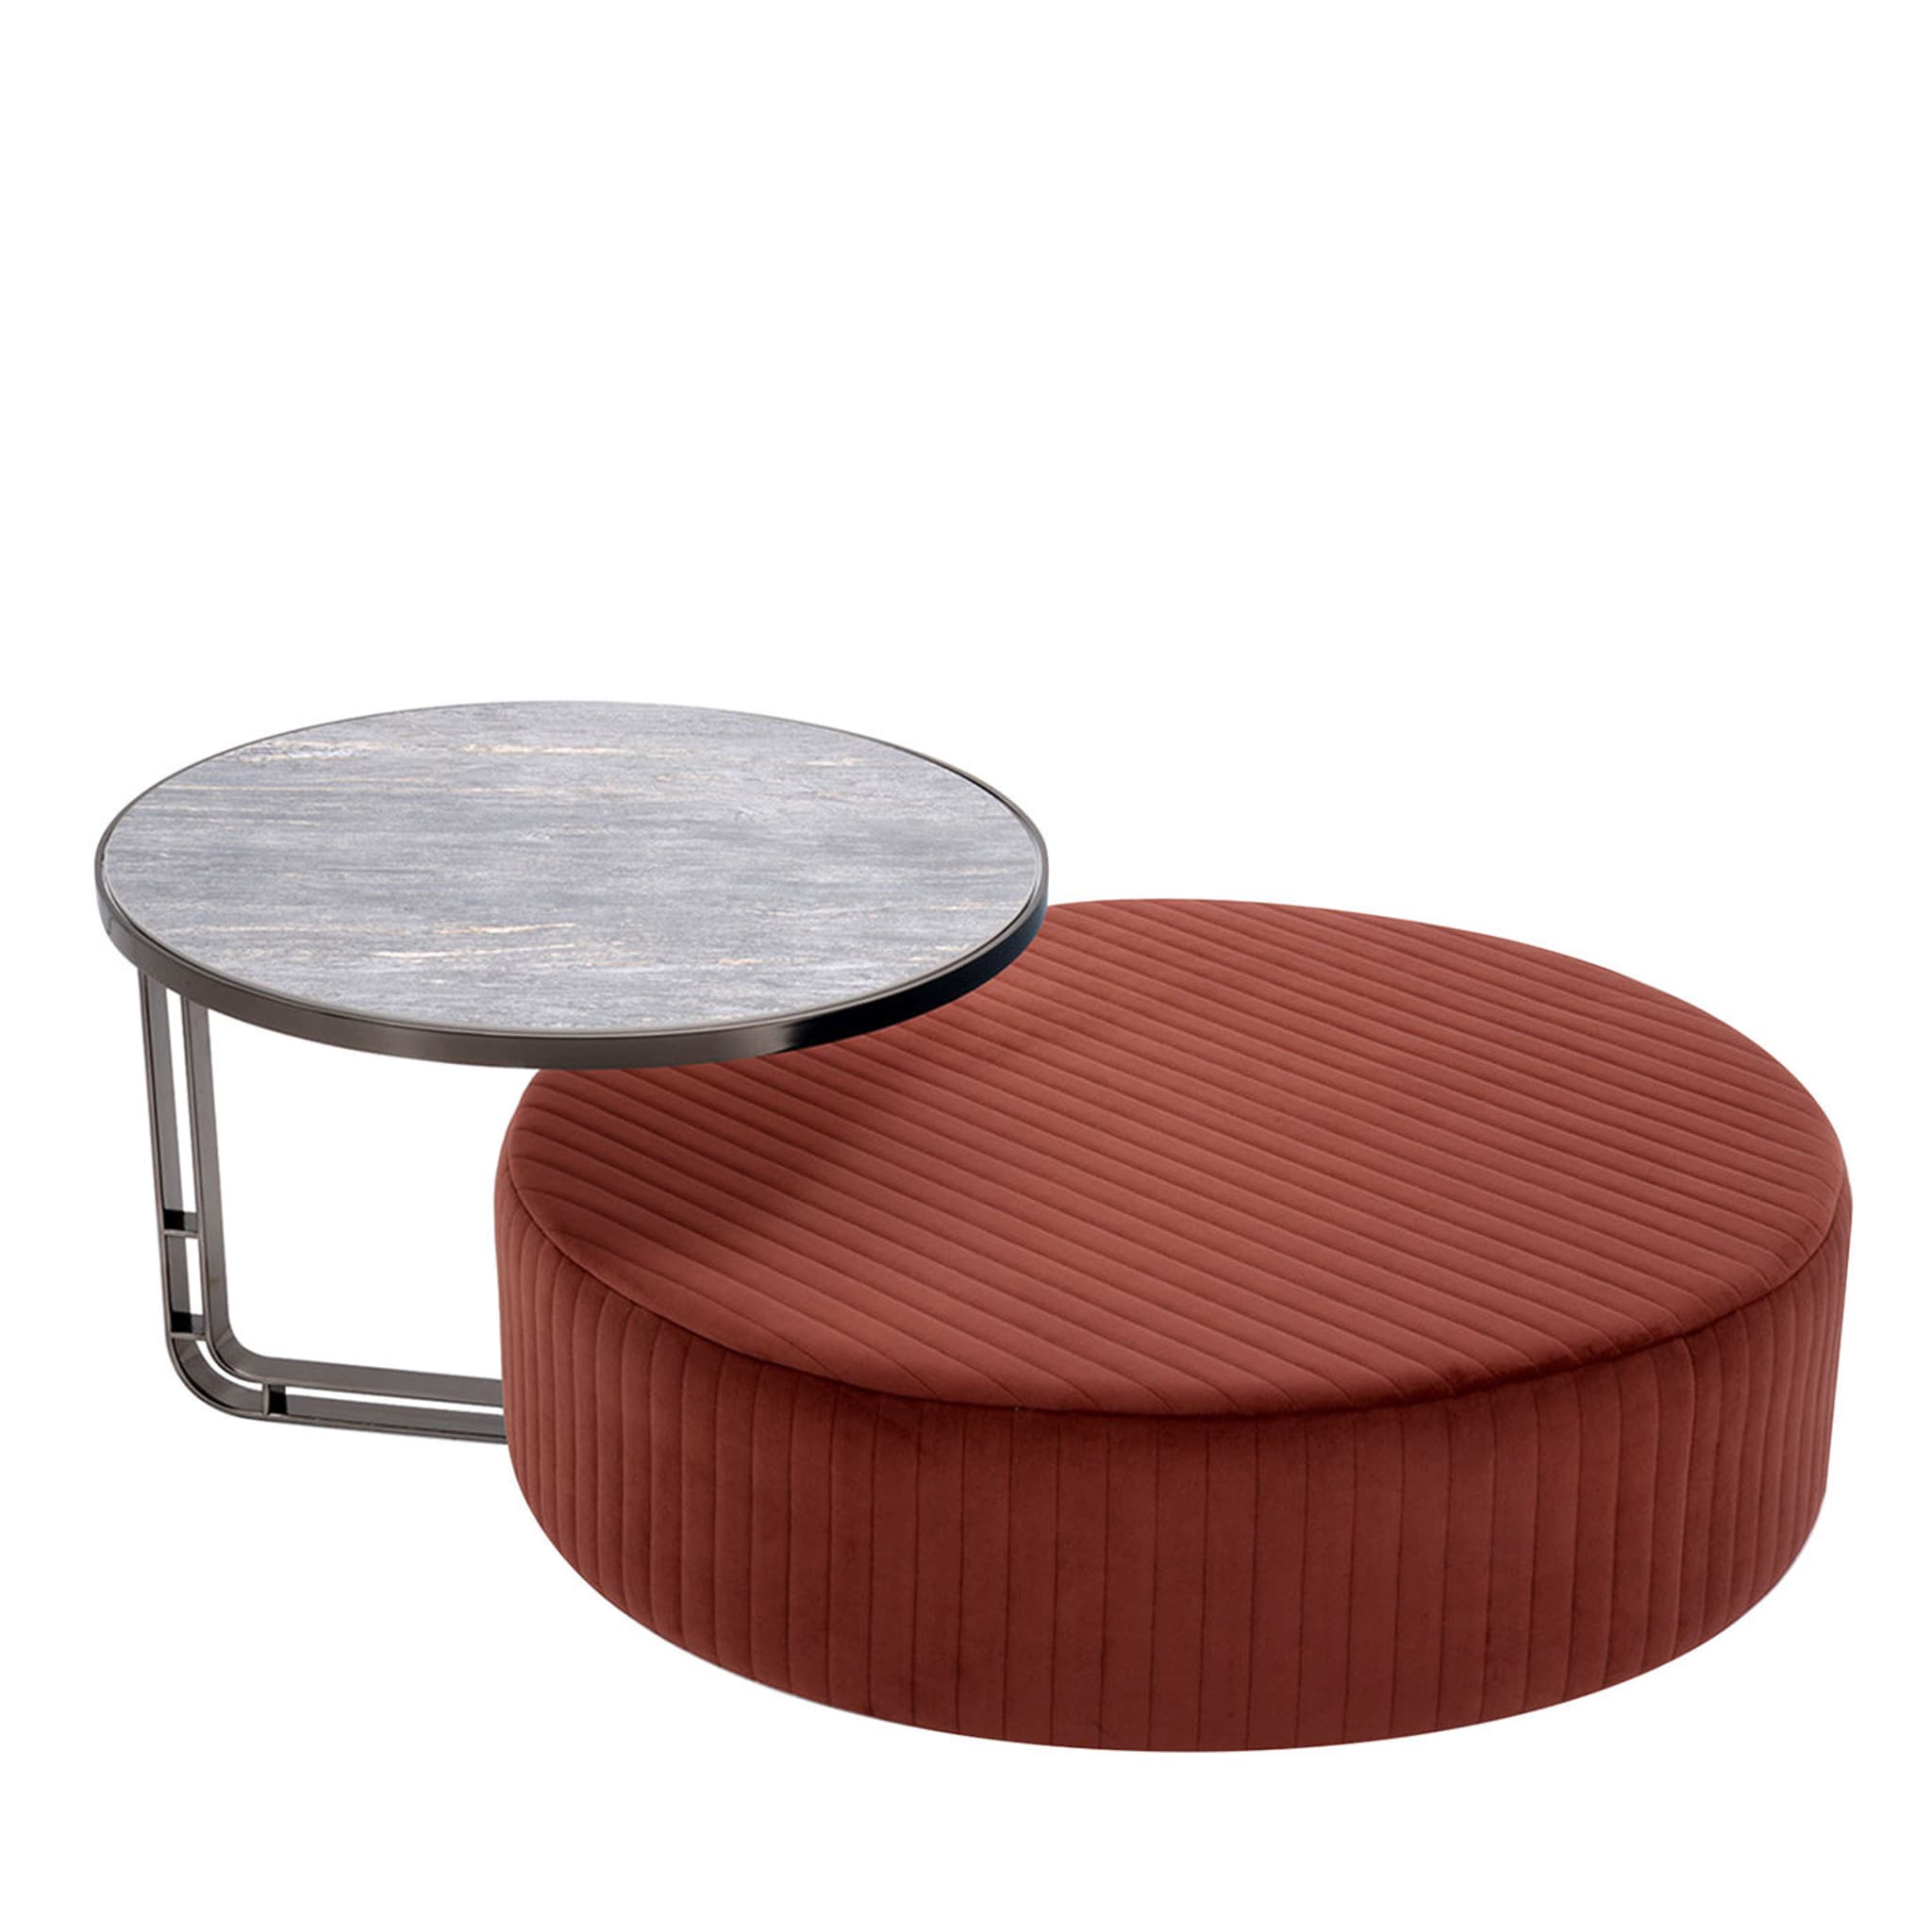 Febe Set of Burgundy Pouf and Small Table - Main view